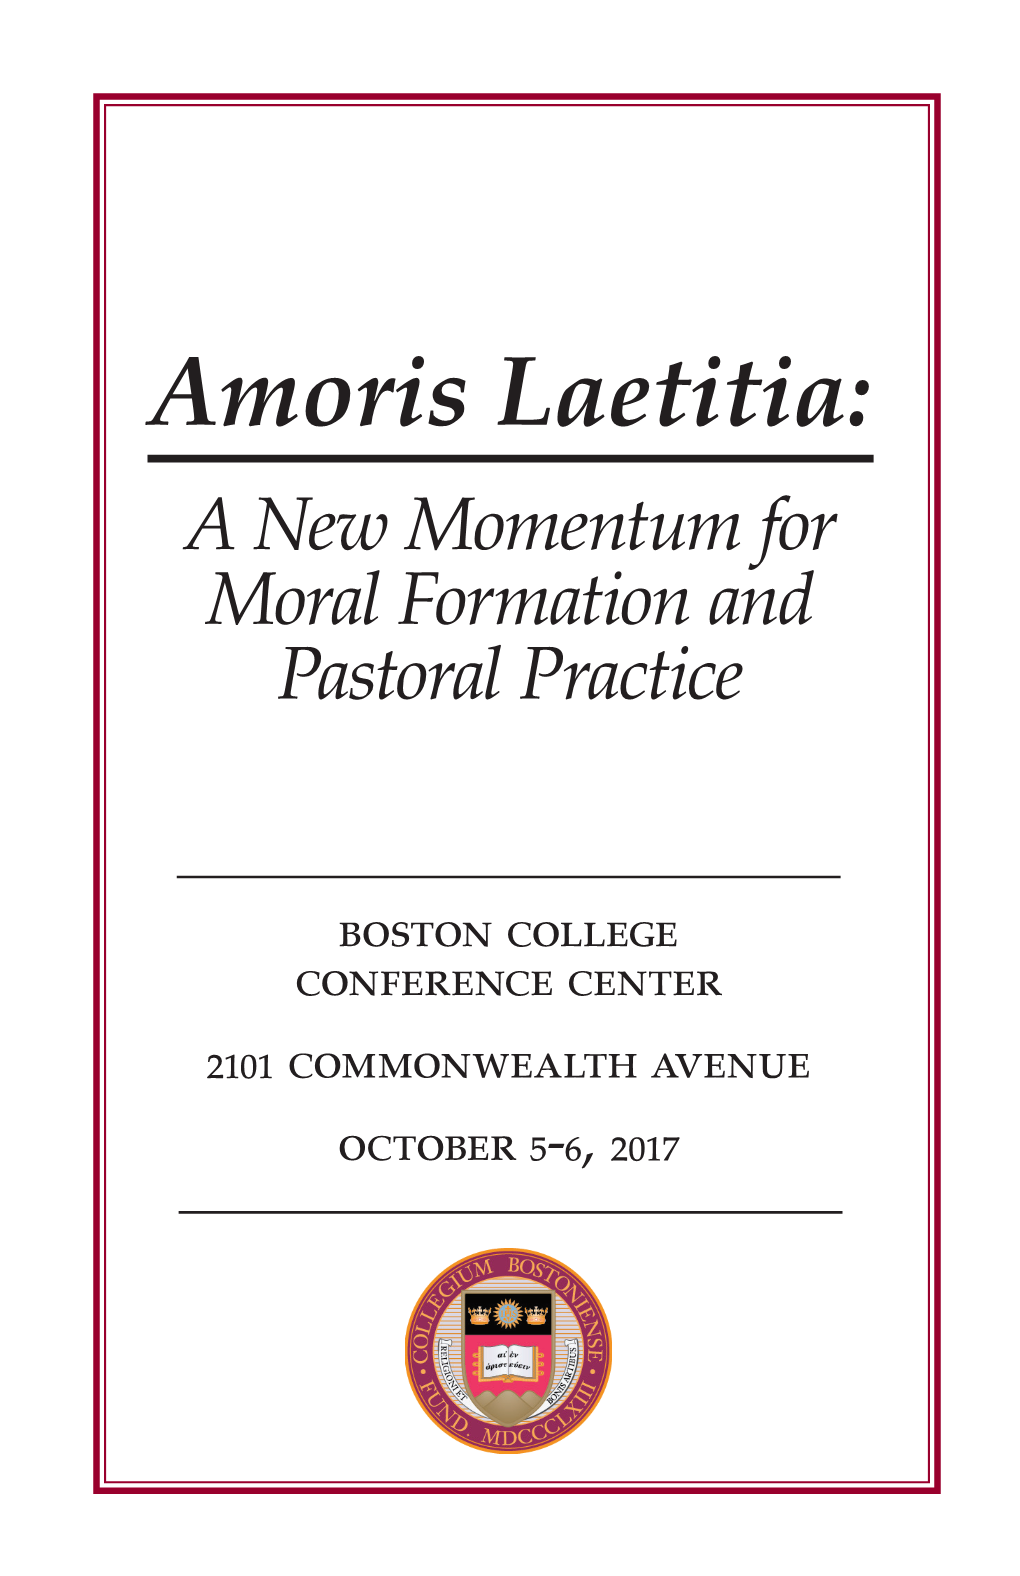 Amoris Laetitia: a New Momentum for Moral Formation and Pastoral Practice